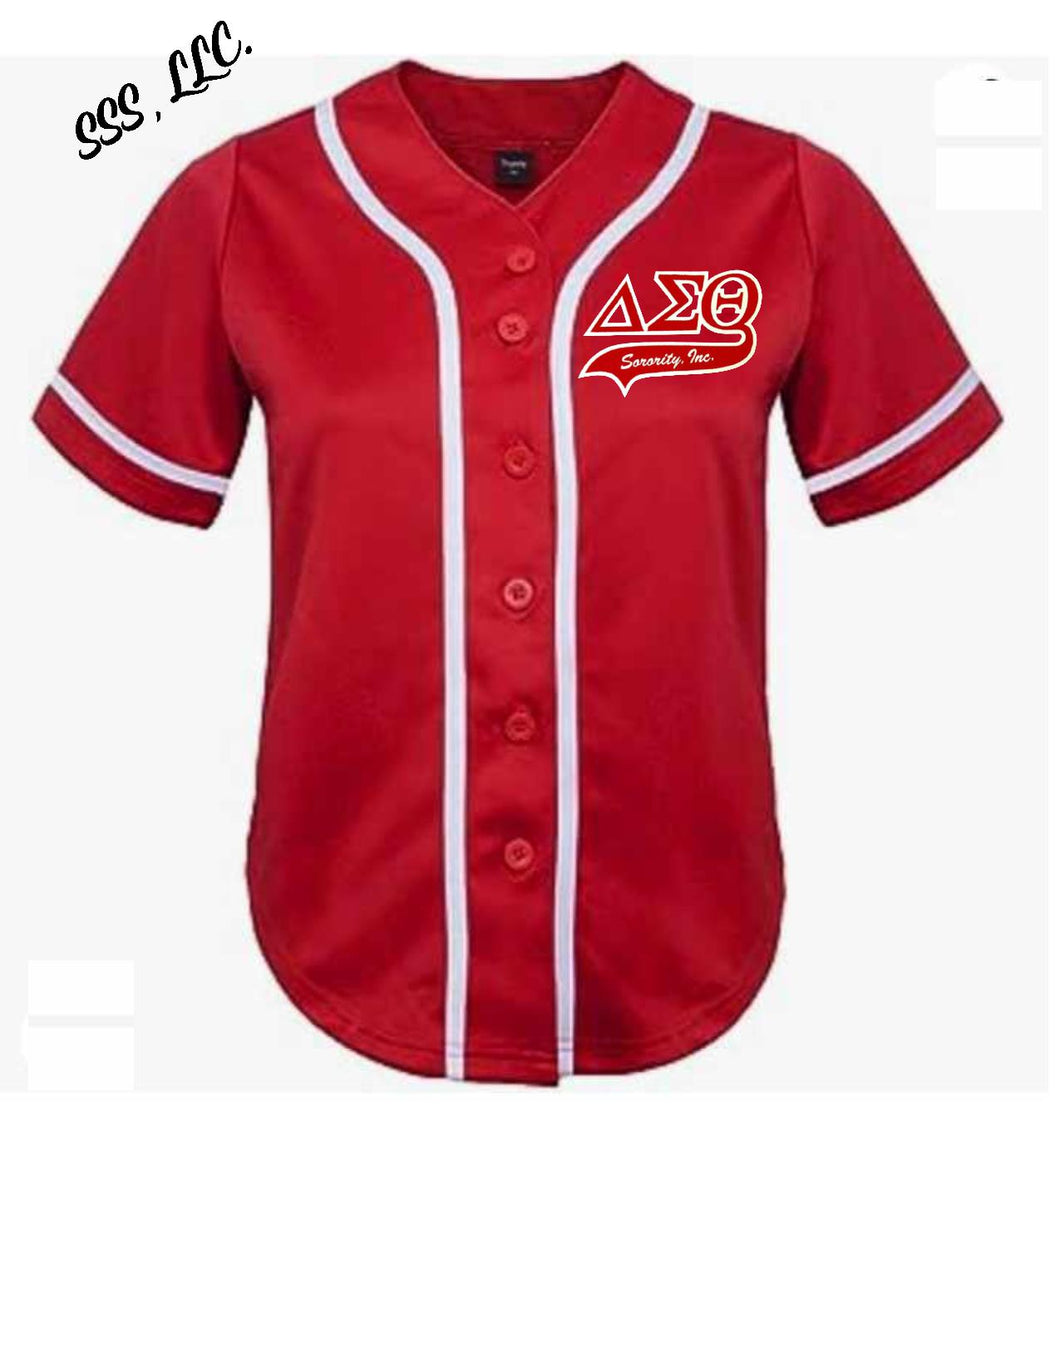 DST Red Baseball Jersey